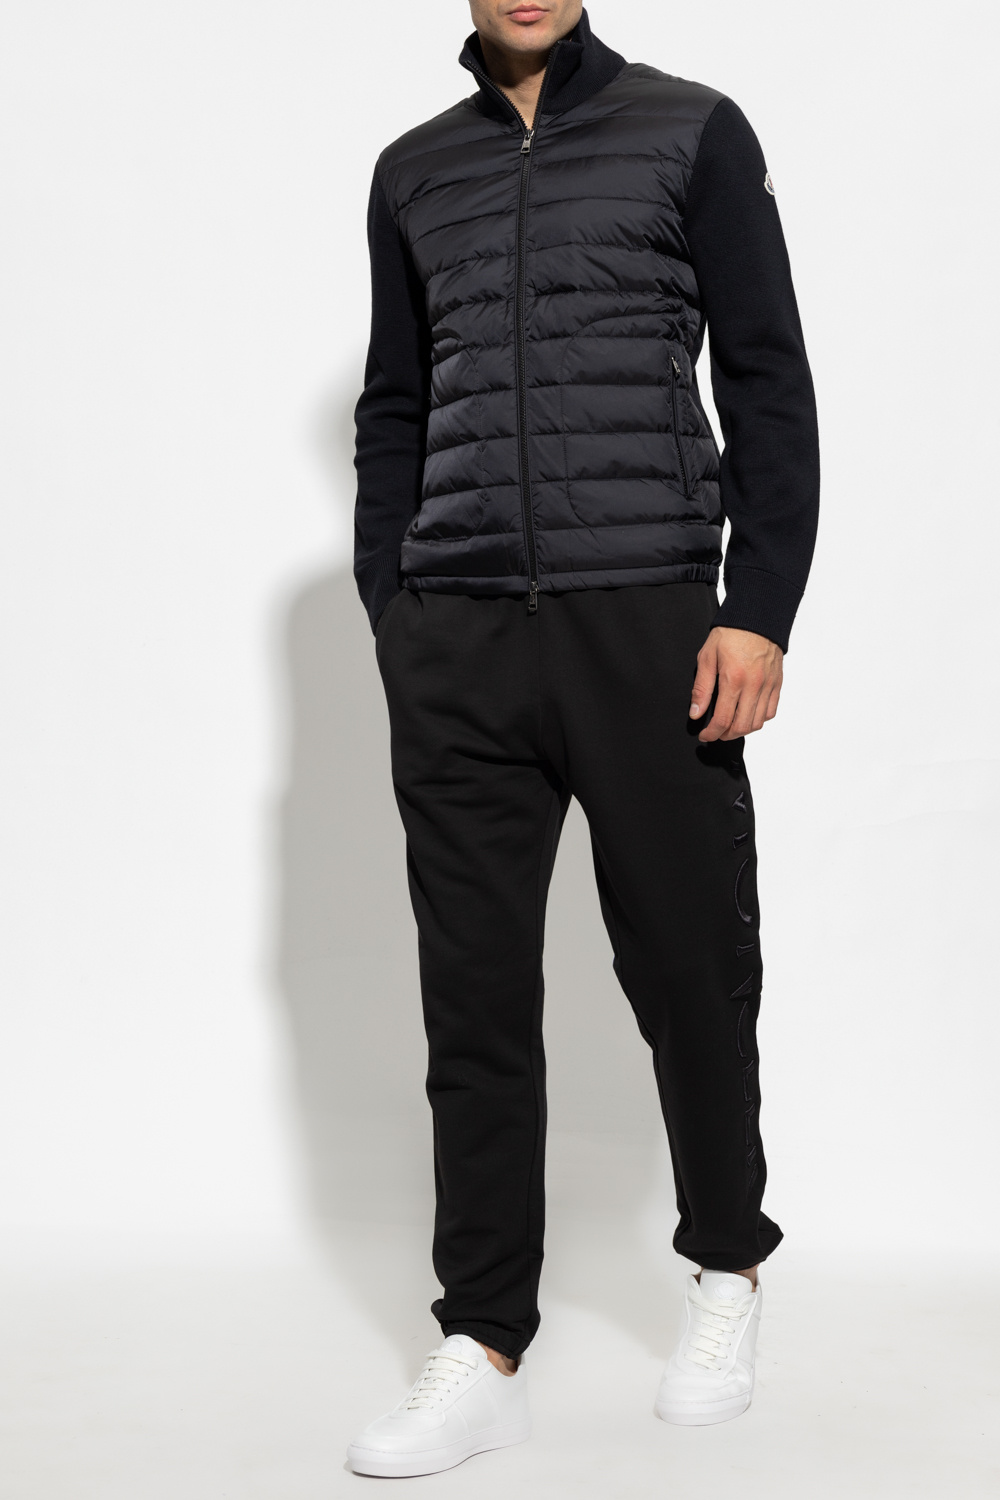 Moncler Add some retro flare to your athleisure looks with these classic navy track pants from